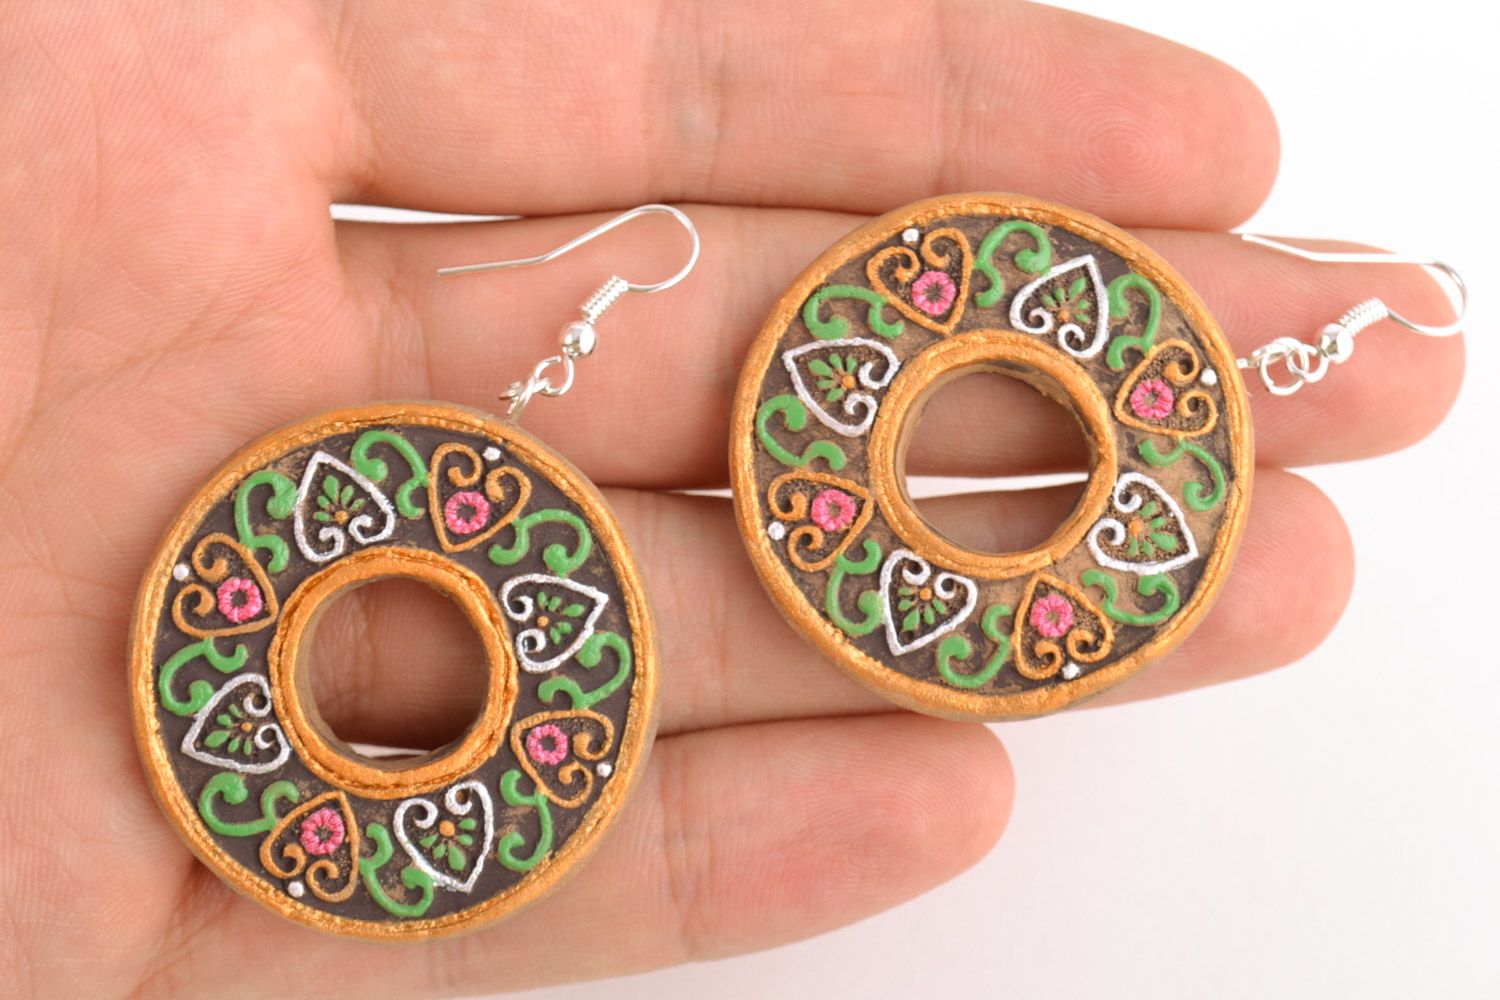 Handmade ring-shaped ceramic dangling earrings painted with festive ornaments photo 2